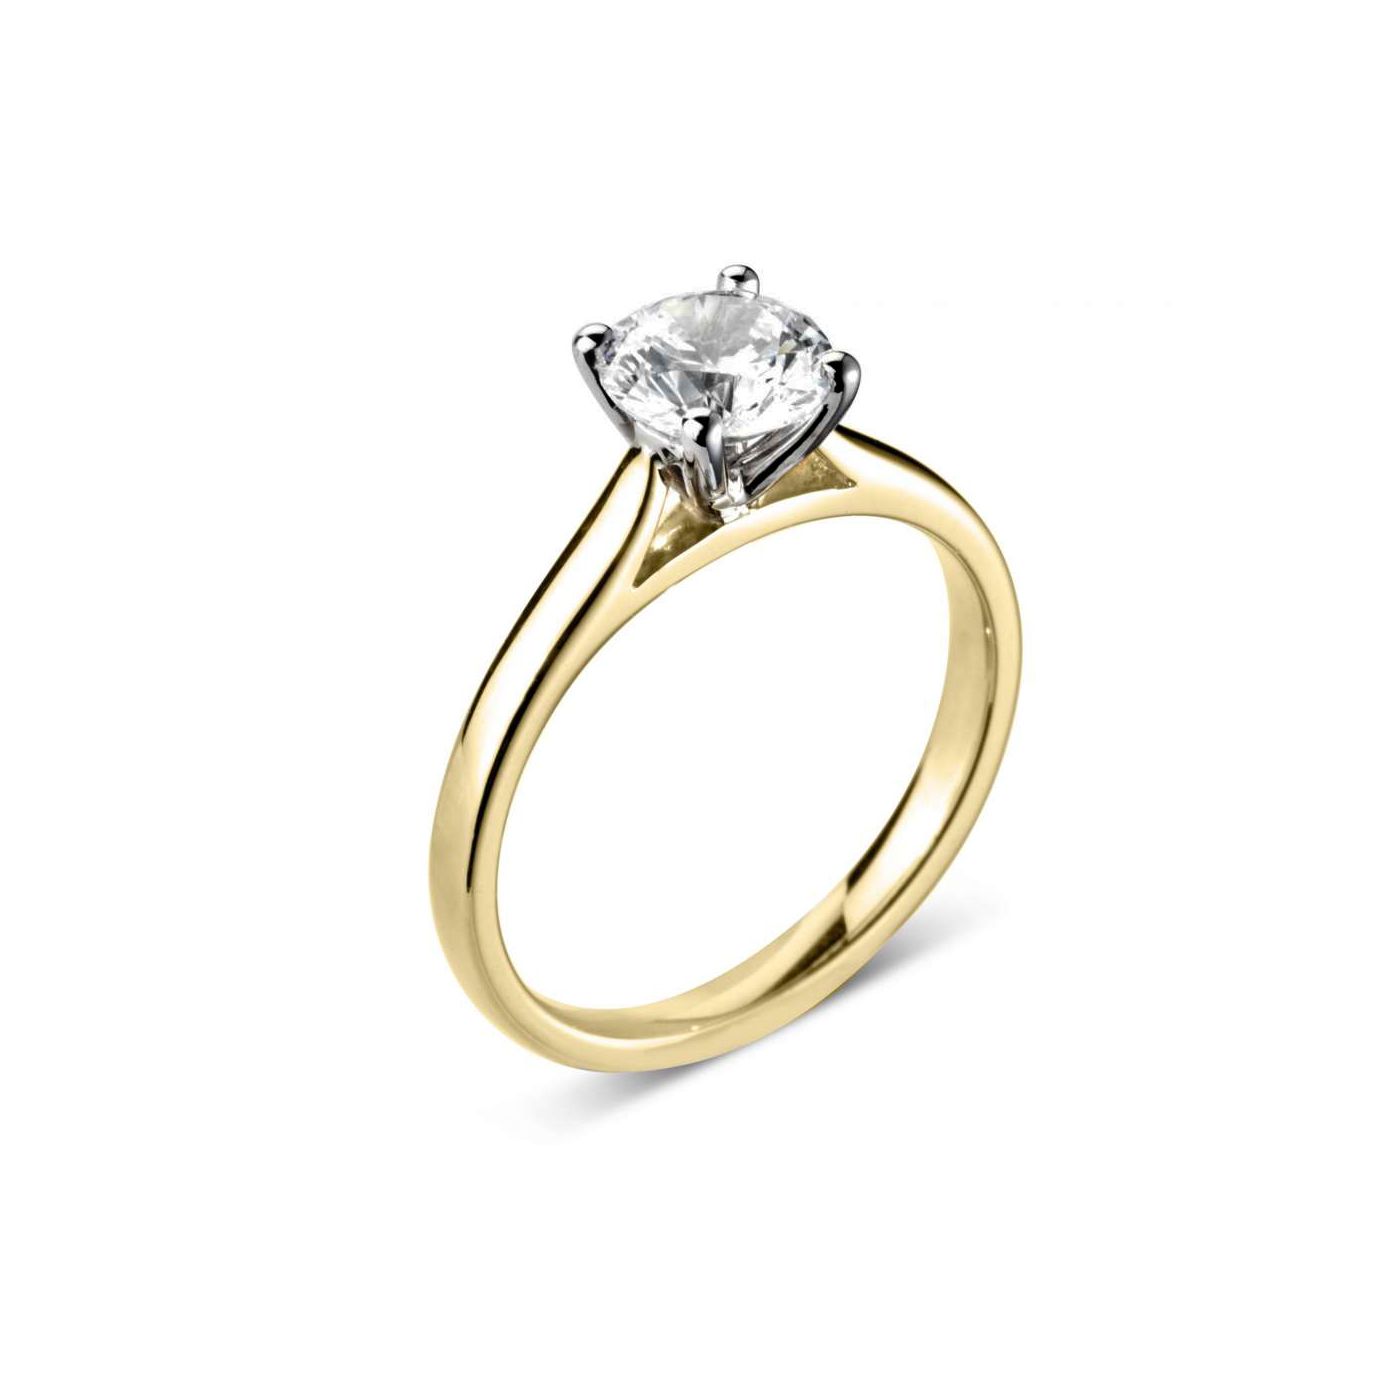 Couture - 18ct. Yellow Gold Solitaire Diamond Engagement Ring - 2.01cts Lab Grown